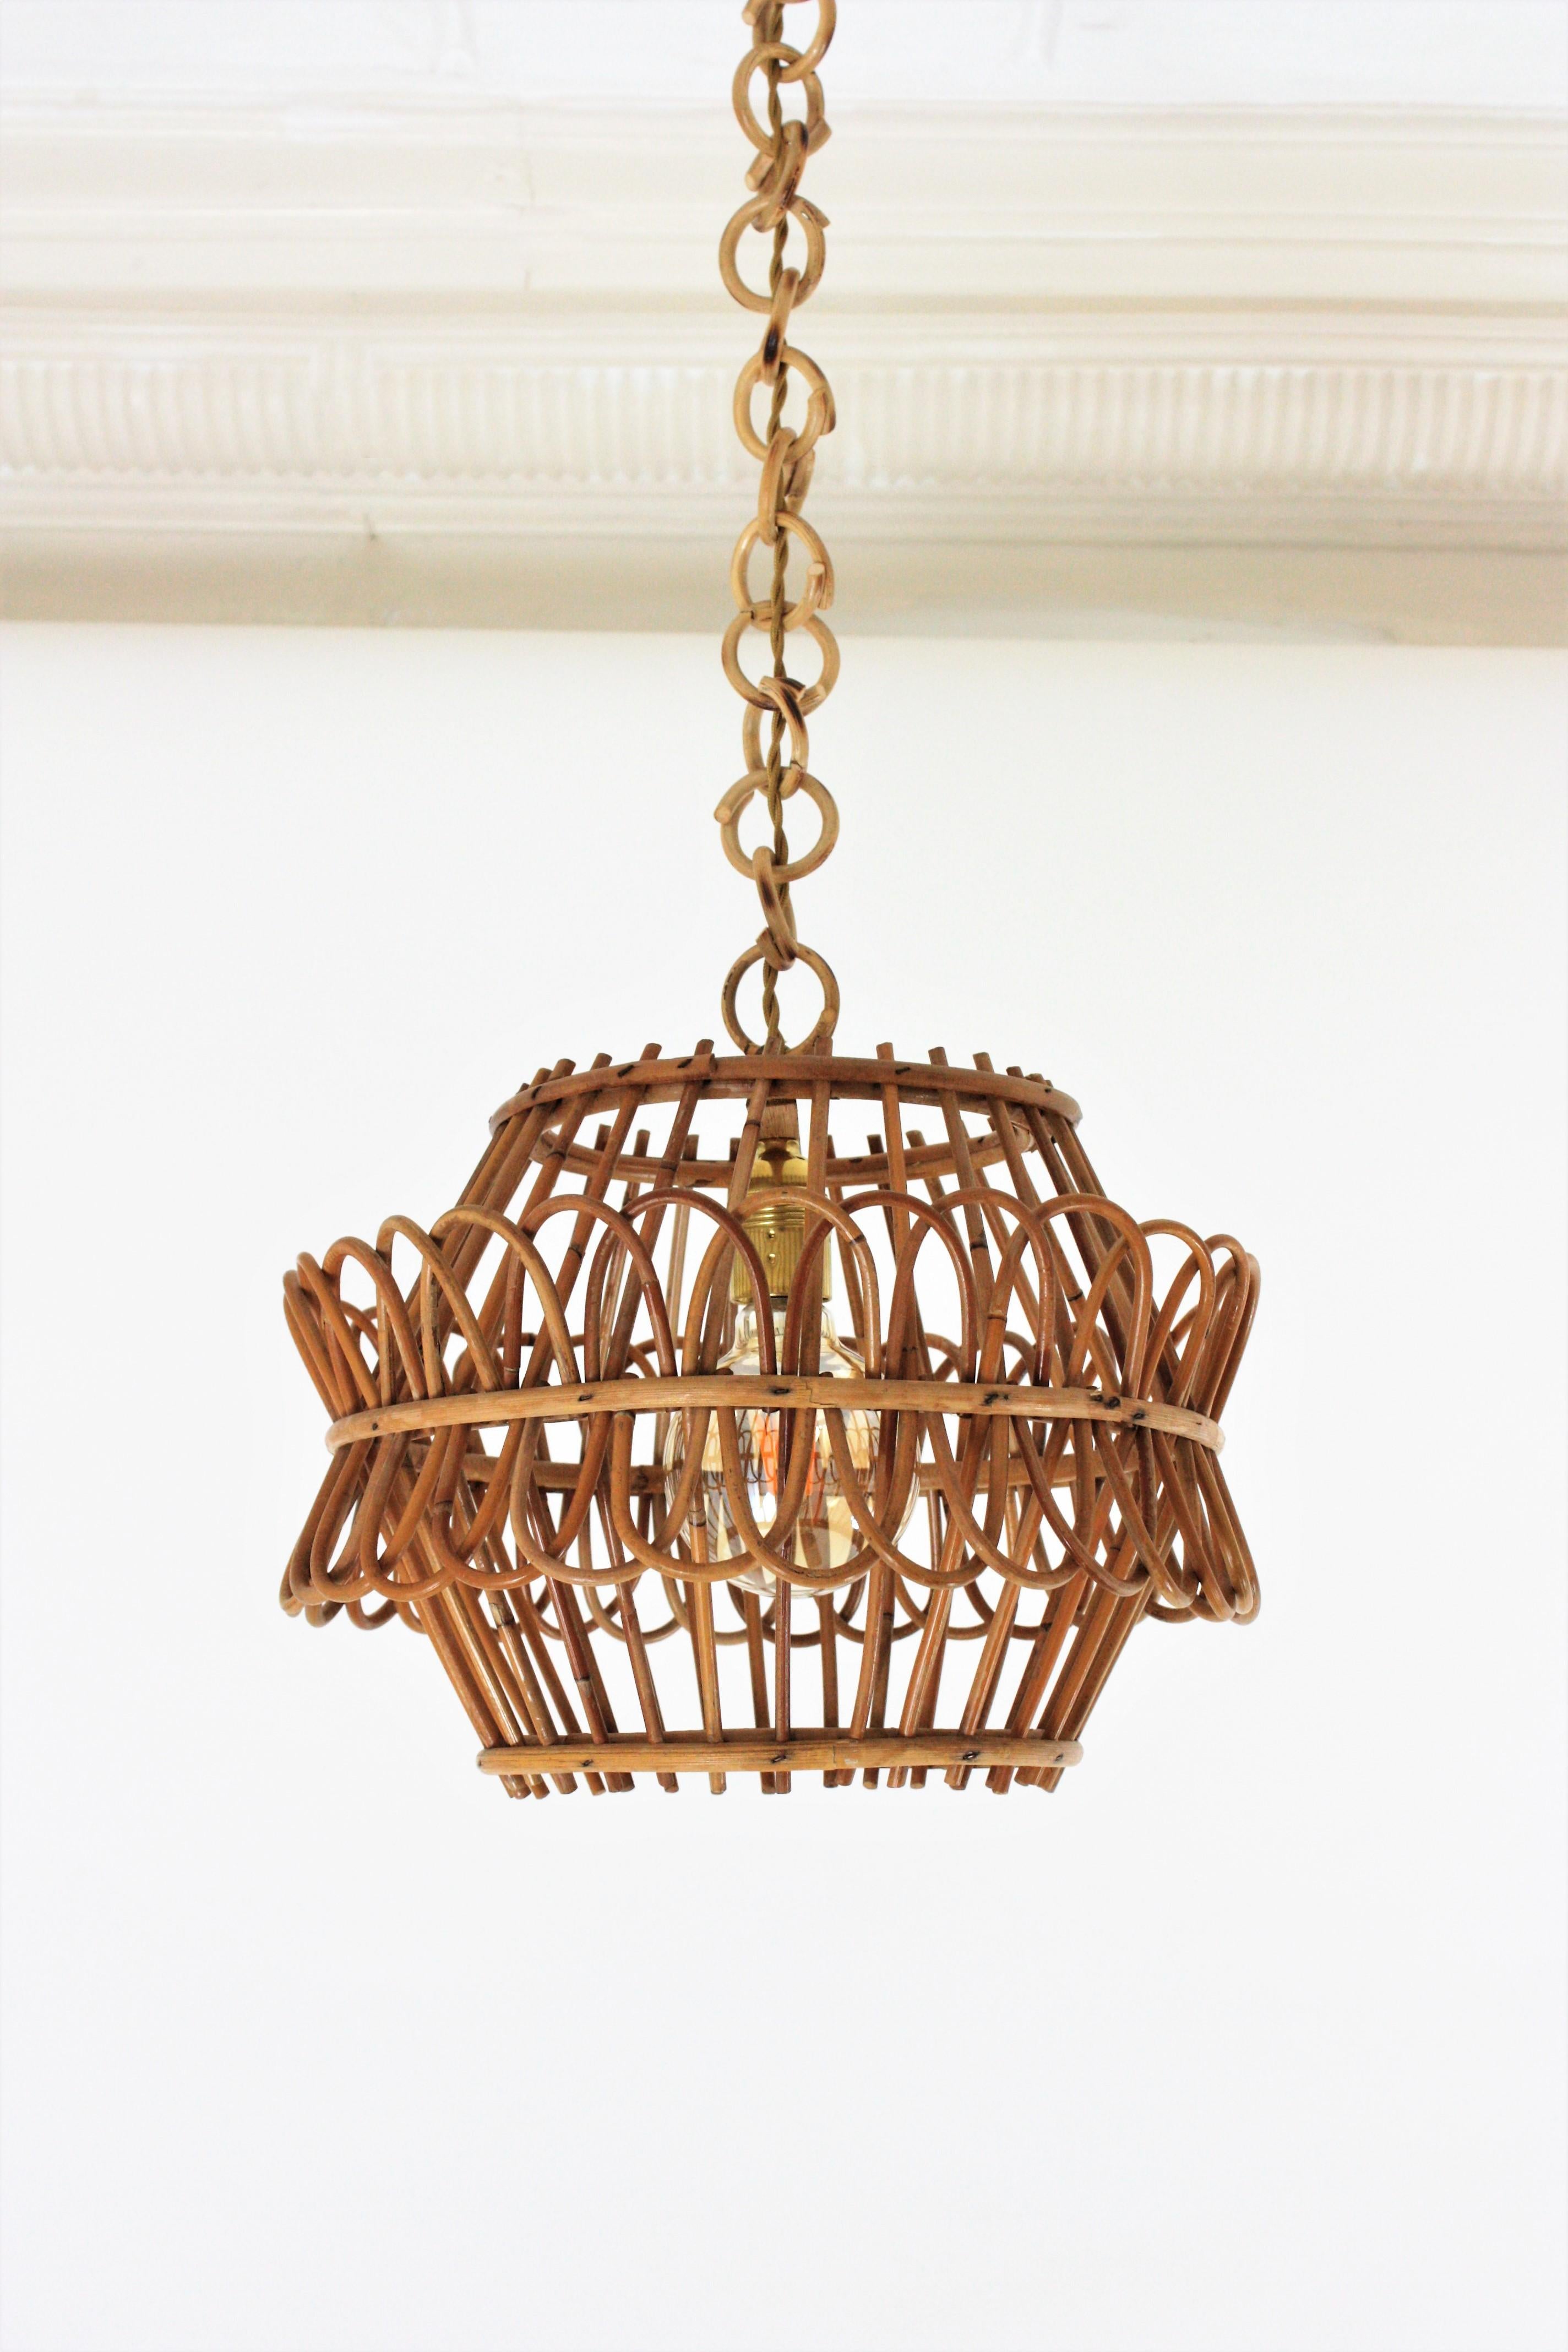 Bamboo French Pendant Light or Lantern in Rattan, 1950s For Sale